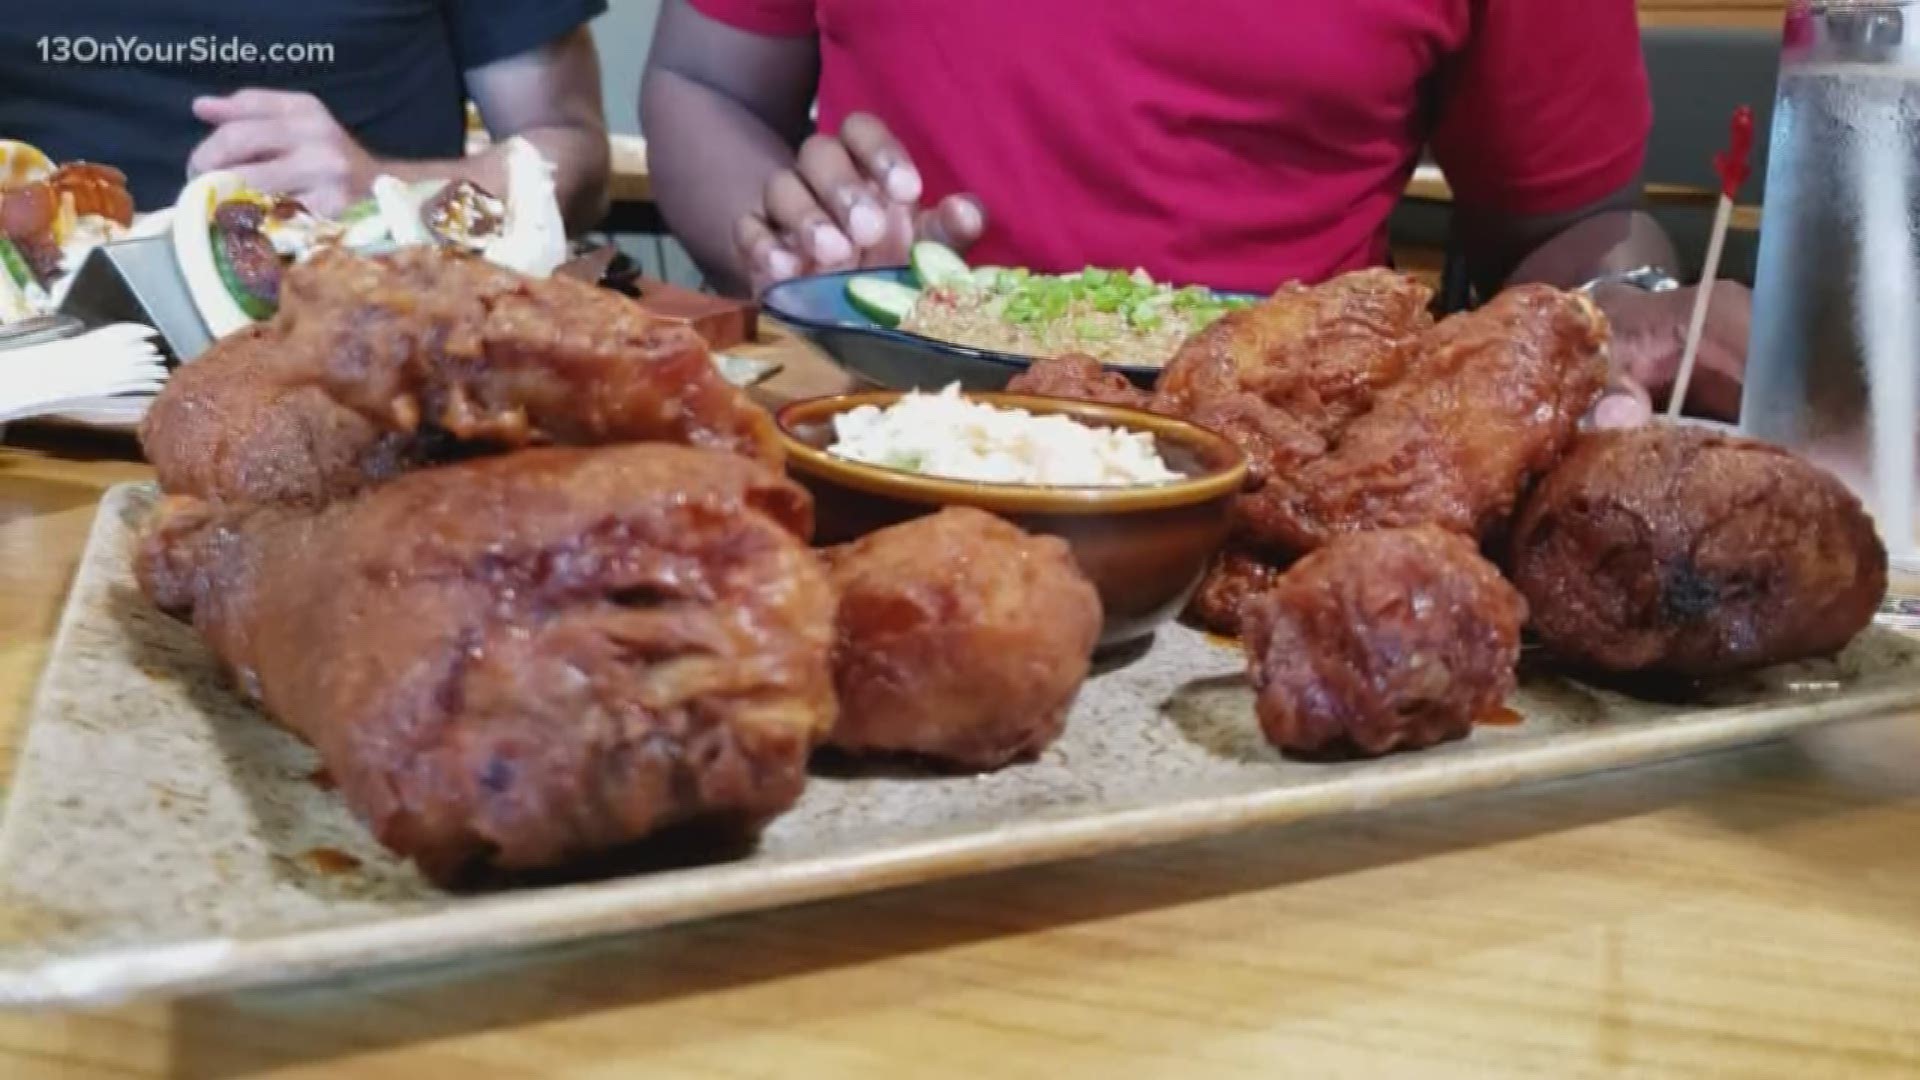 In this edition of Let's Eat, James and Dave take on Korean fried chicken at Bonchon. Yum!